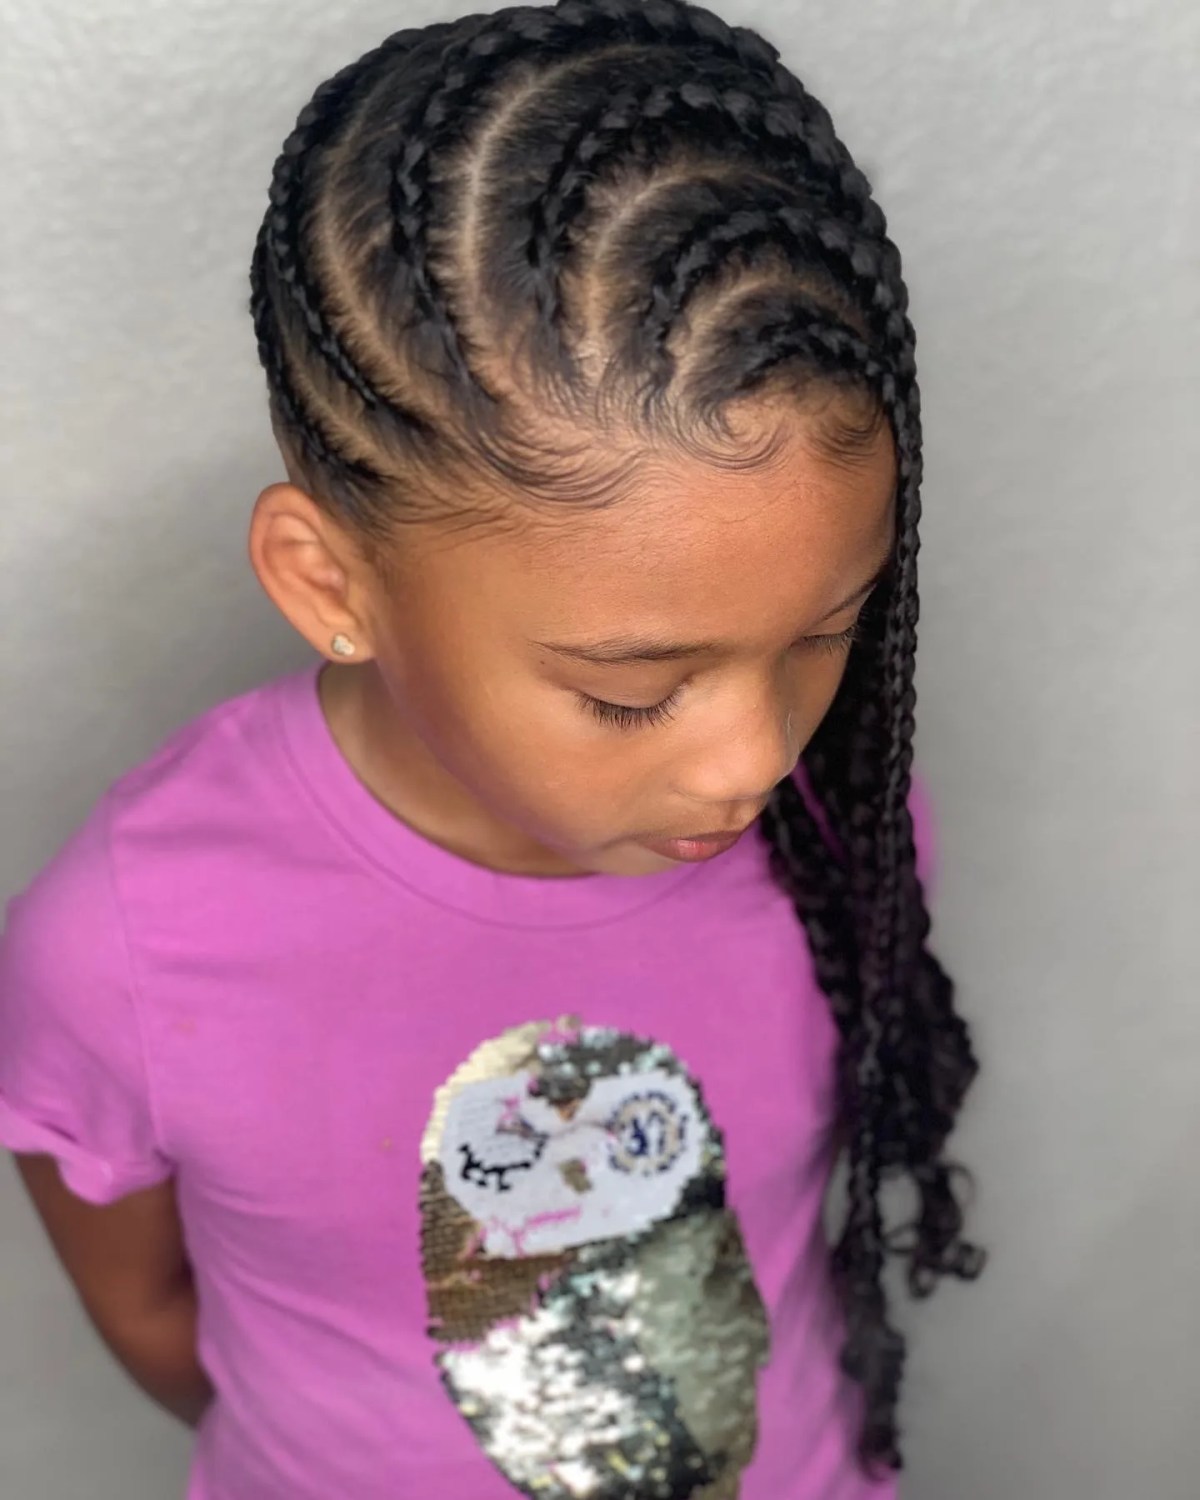 anthony mondero recommends cute braids for mixed hair pic